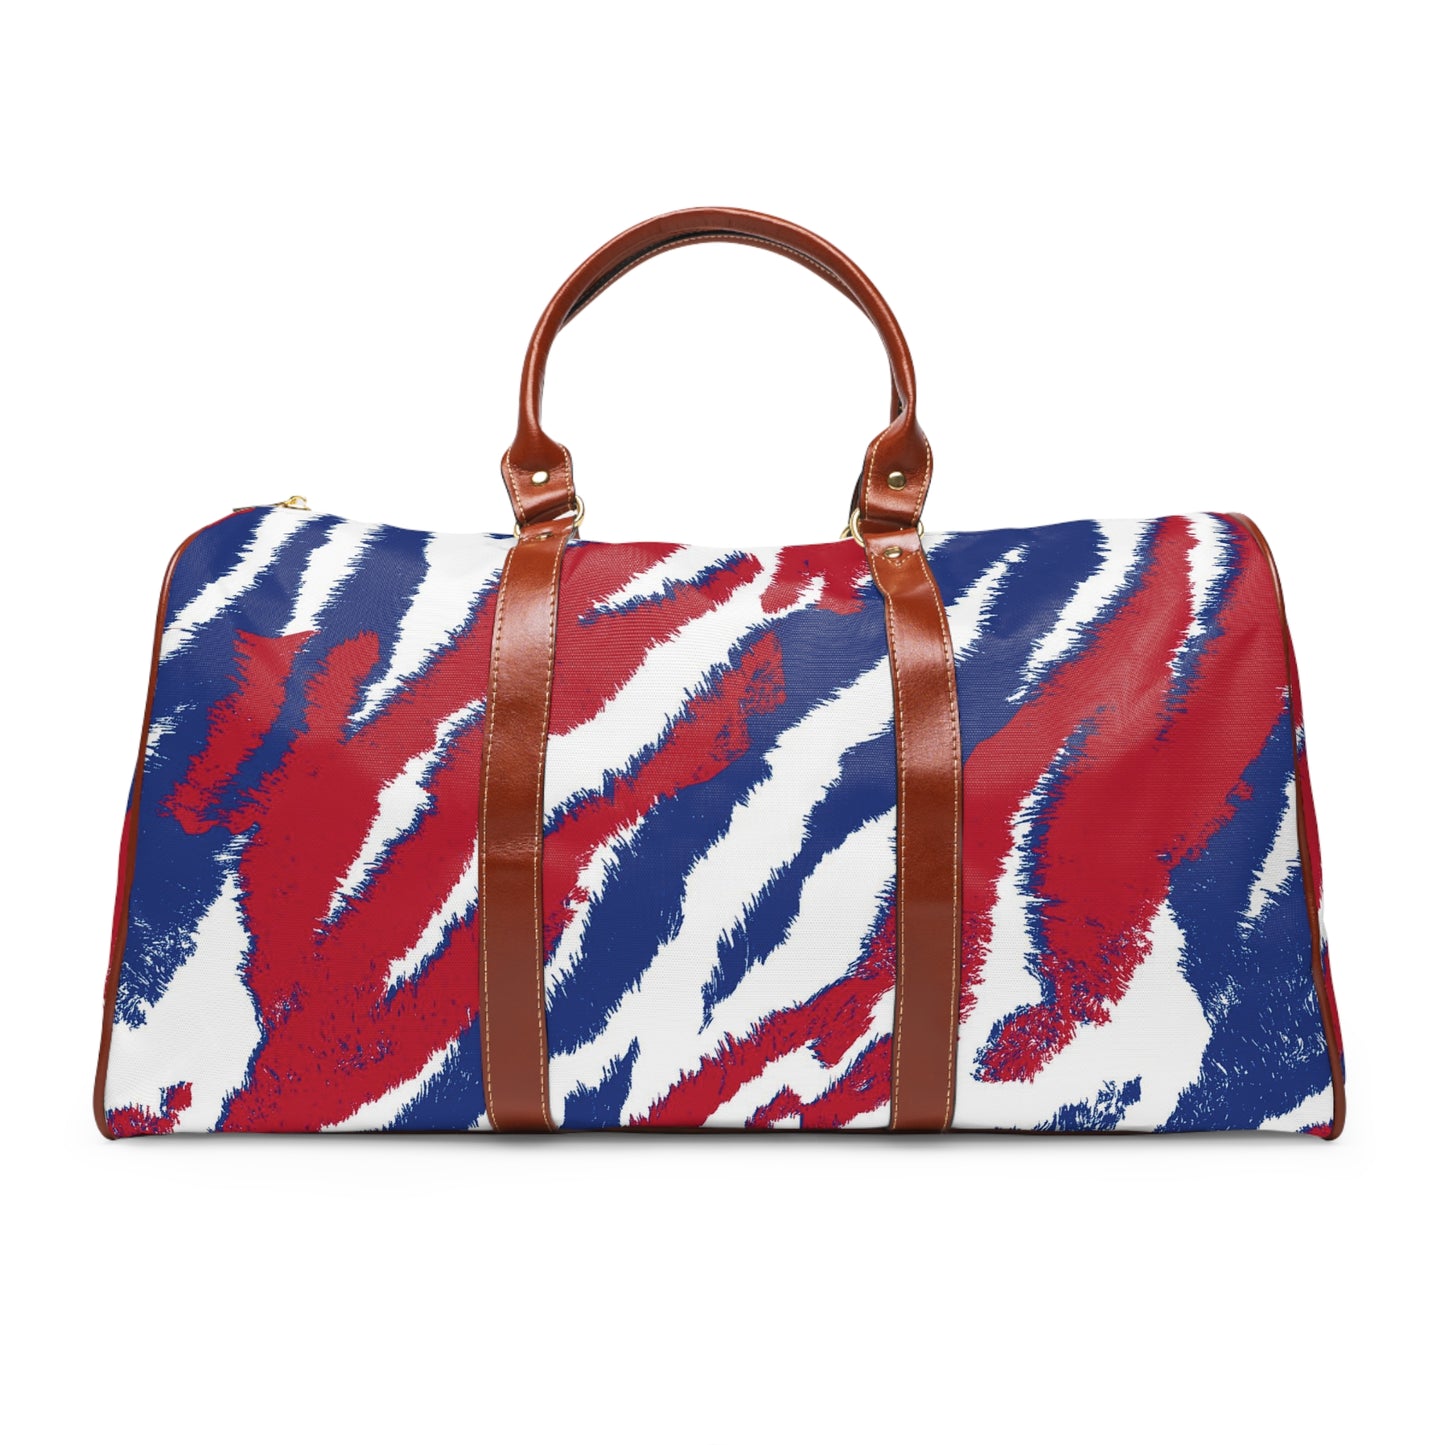 Red White and Blue Stripes - Waterproof Travel Bag